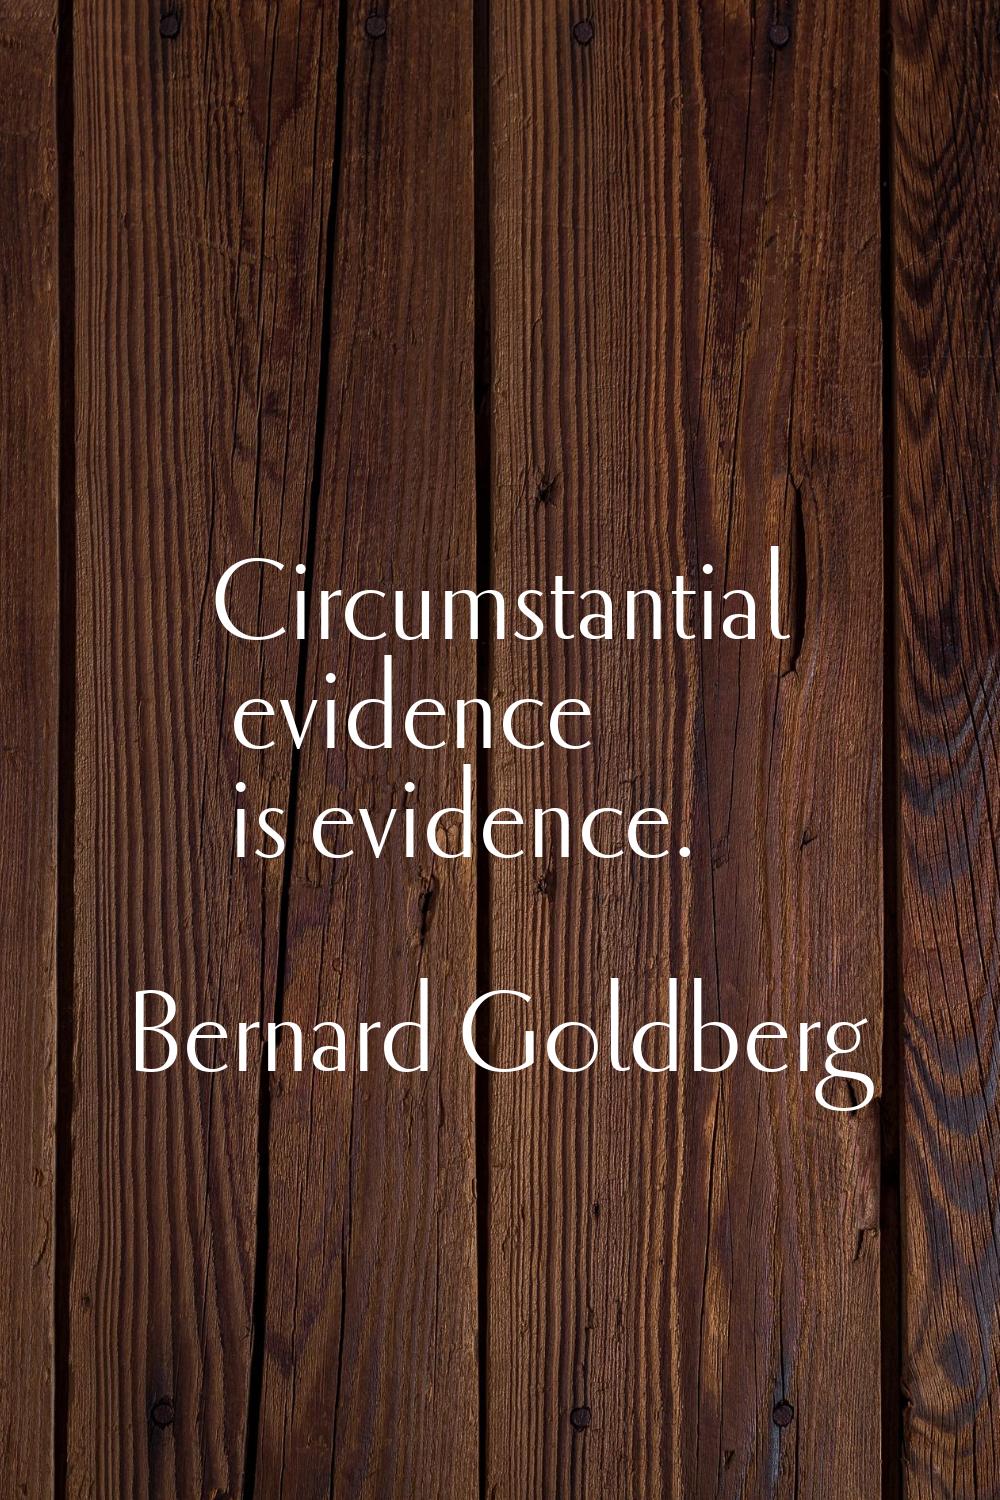 Circumstantial evidence is evidence.